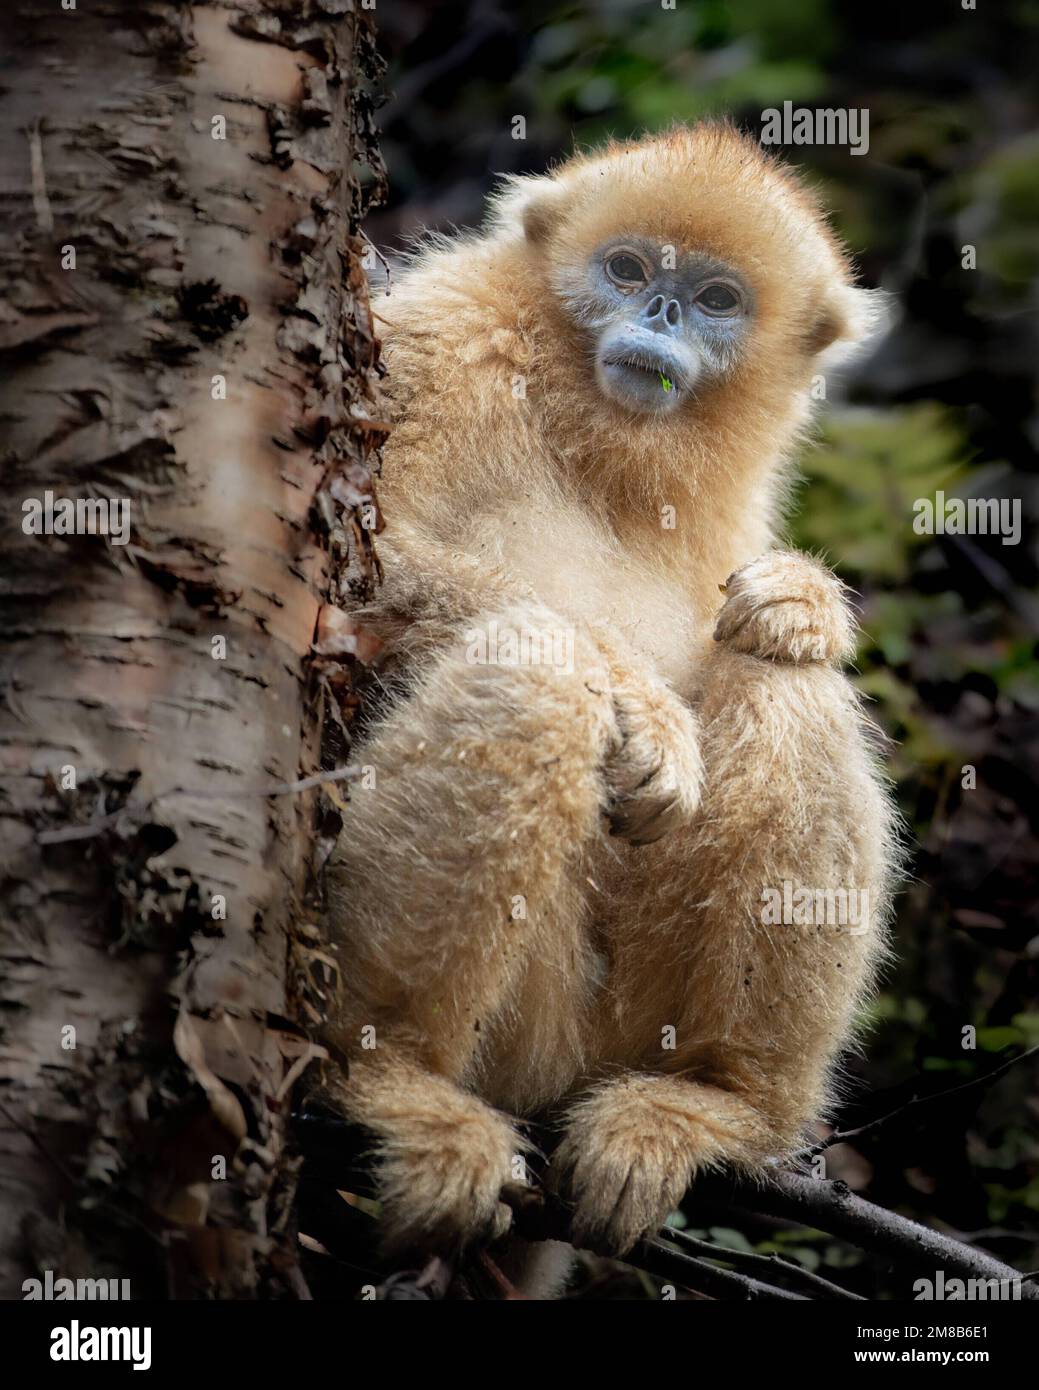 A curious george. China: THESE EXPRESSIVE images show wild snub-nosed monkey and their amazing range of emotions that have seen members of this specie Stock Photo